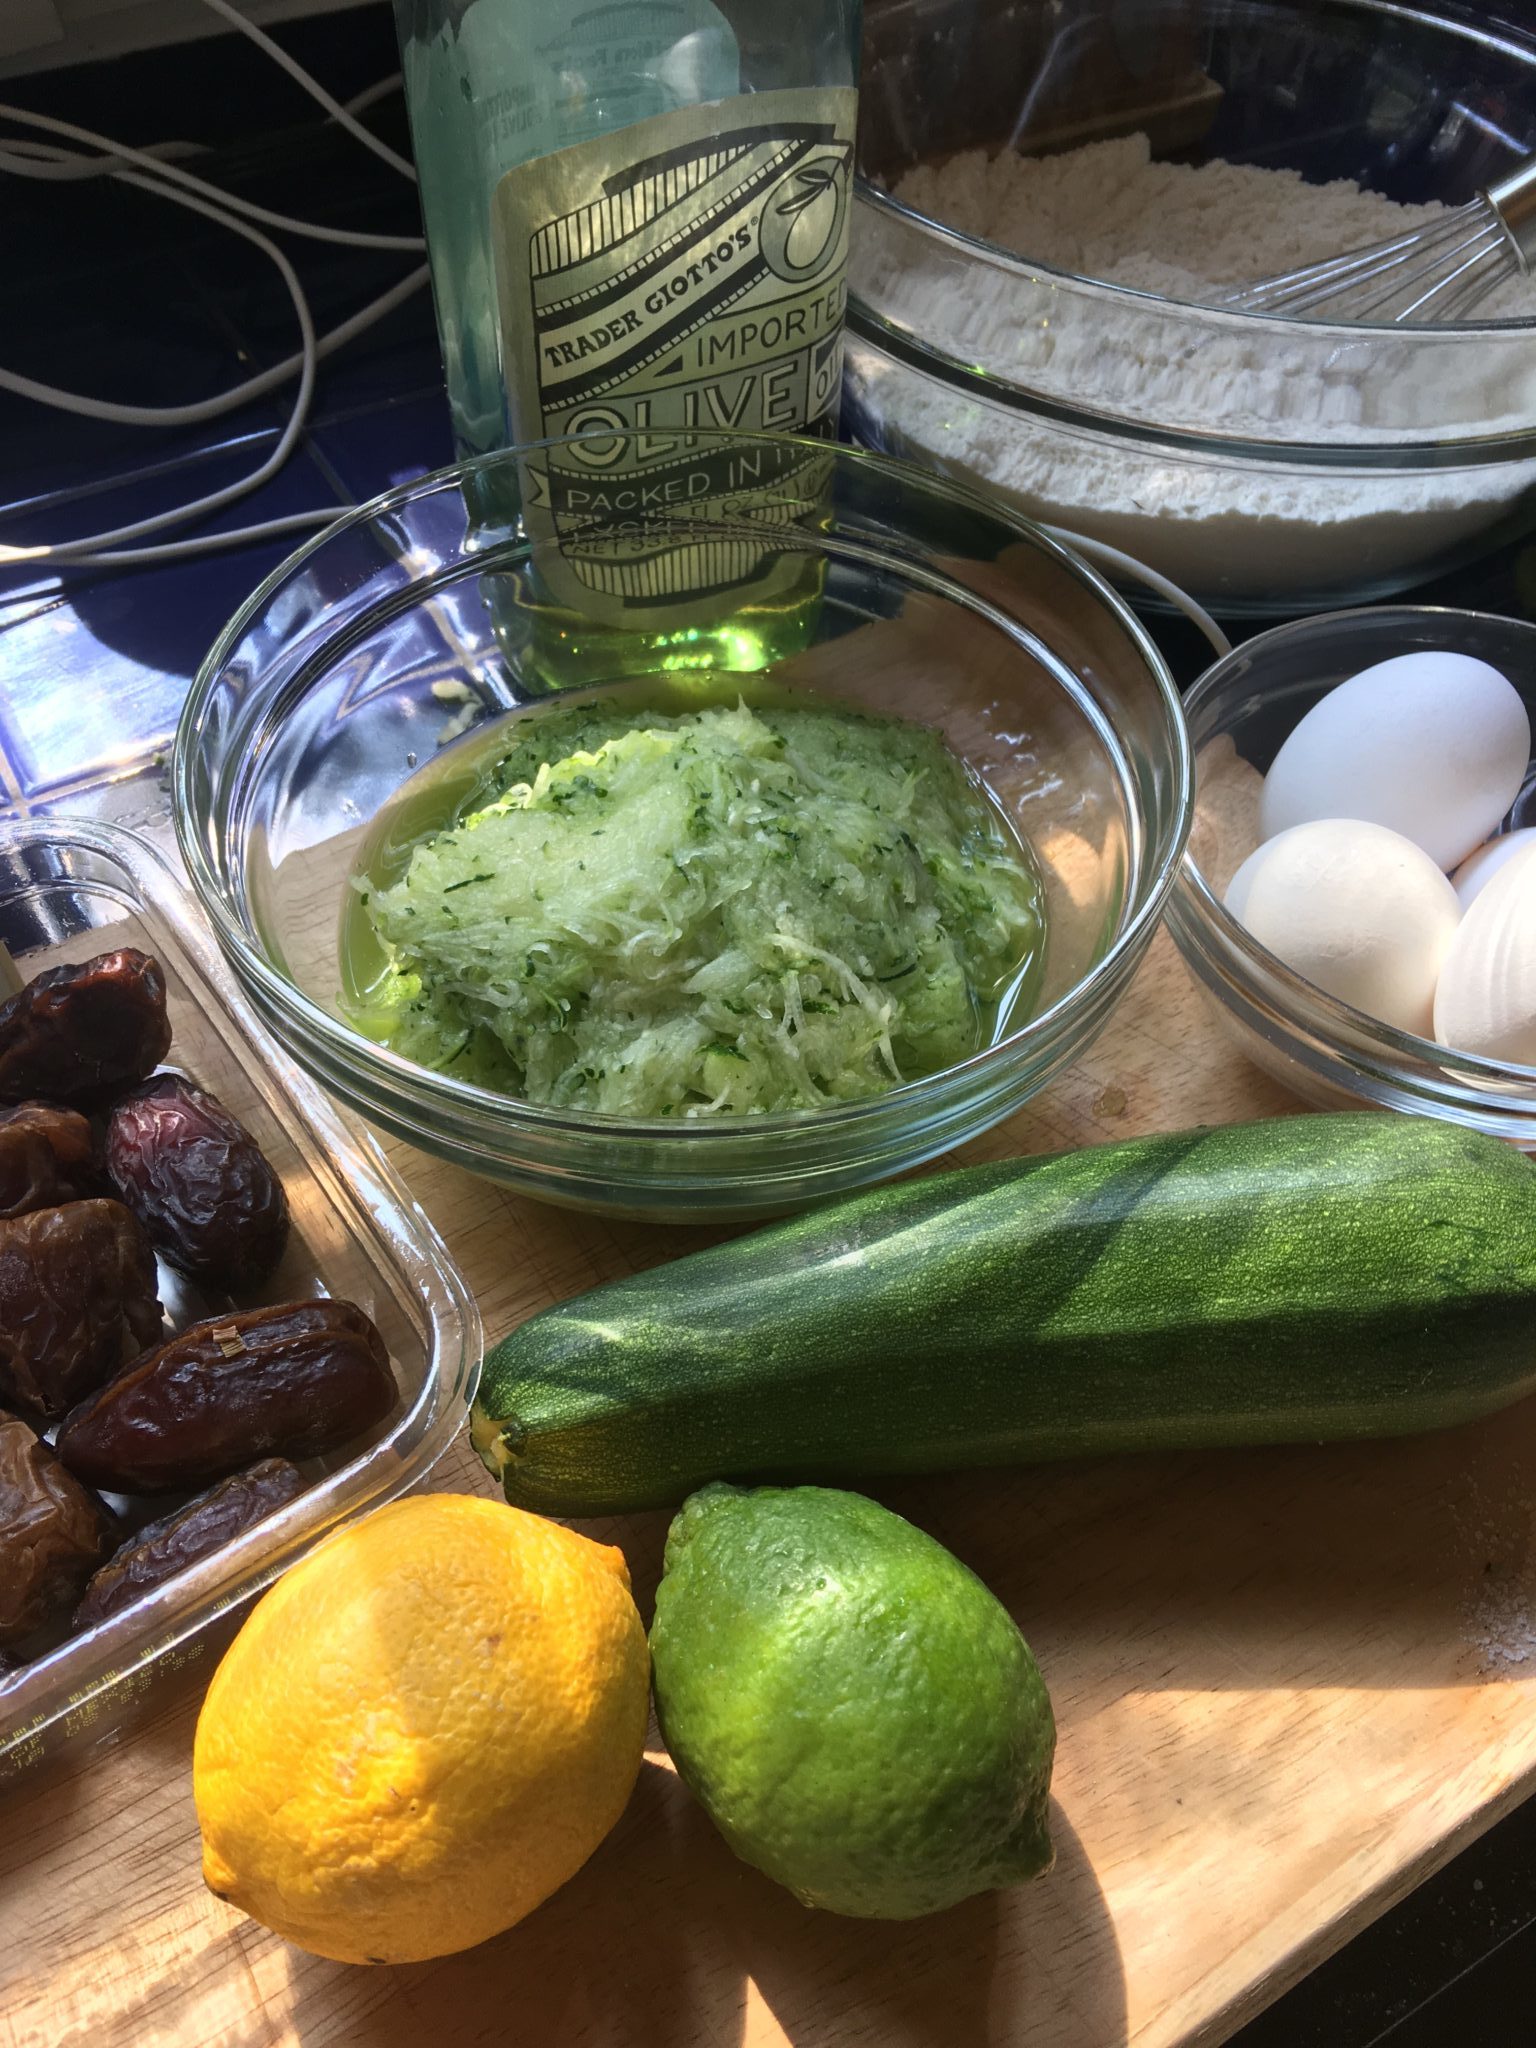 Ingredients for zucchini bread